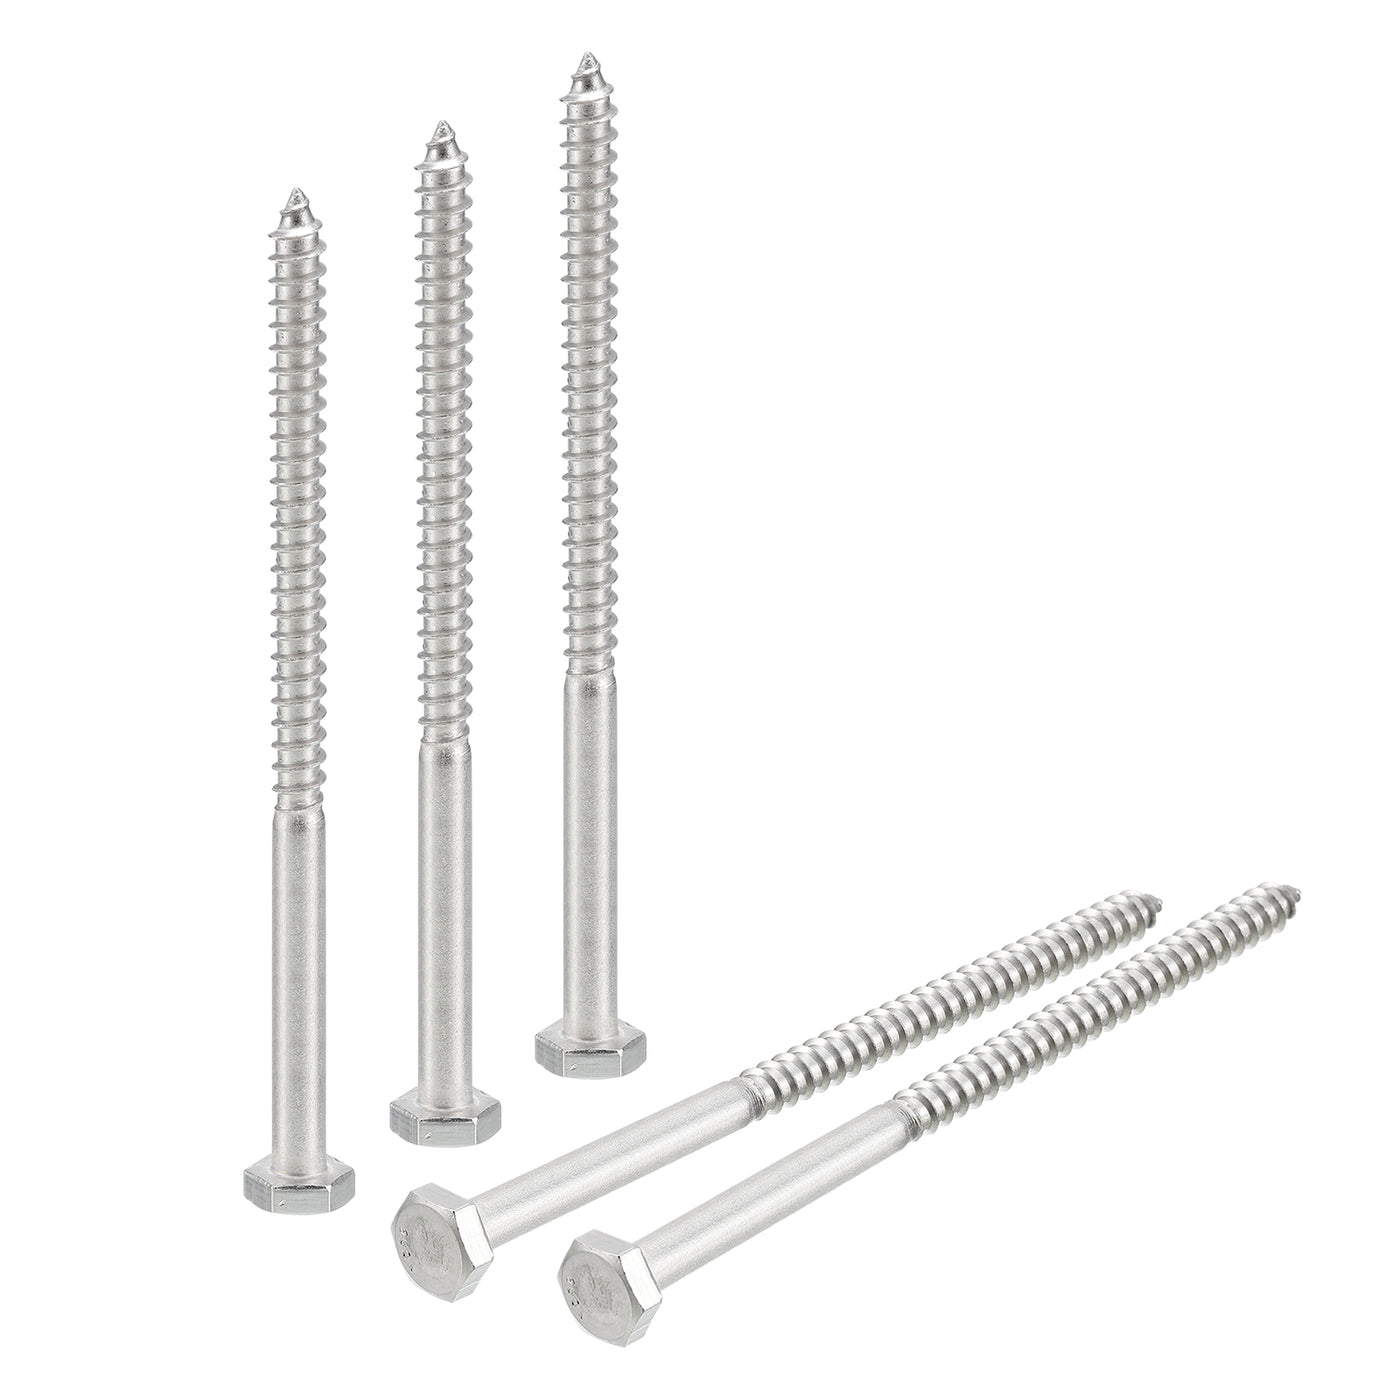 uxcell Uxcell Hex Head Lag Screws Bolts, 5pcs 1/4" x 4" 304 Stainless Steel Wood Screws